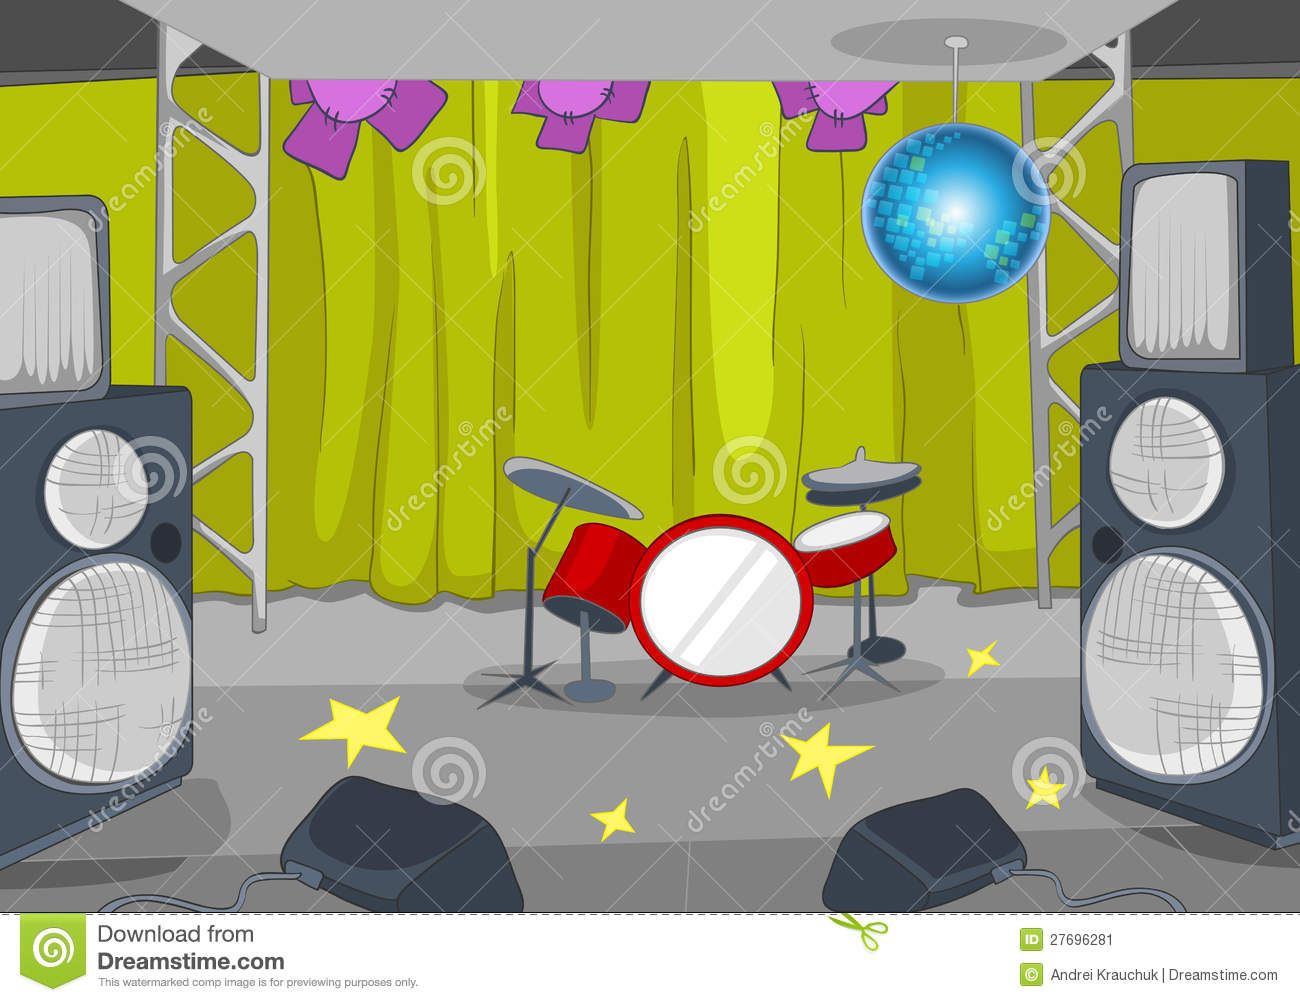 lighting clipart musical play